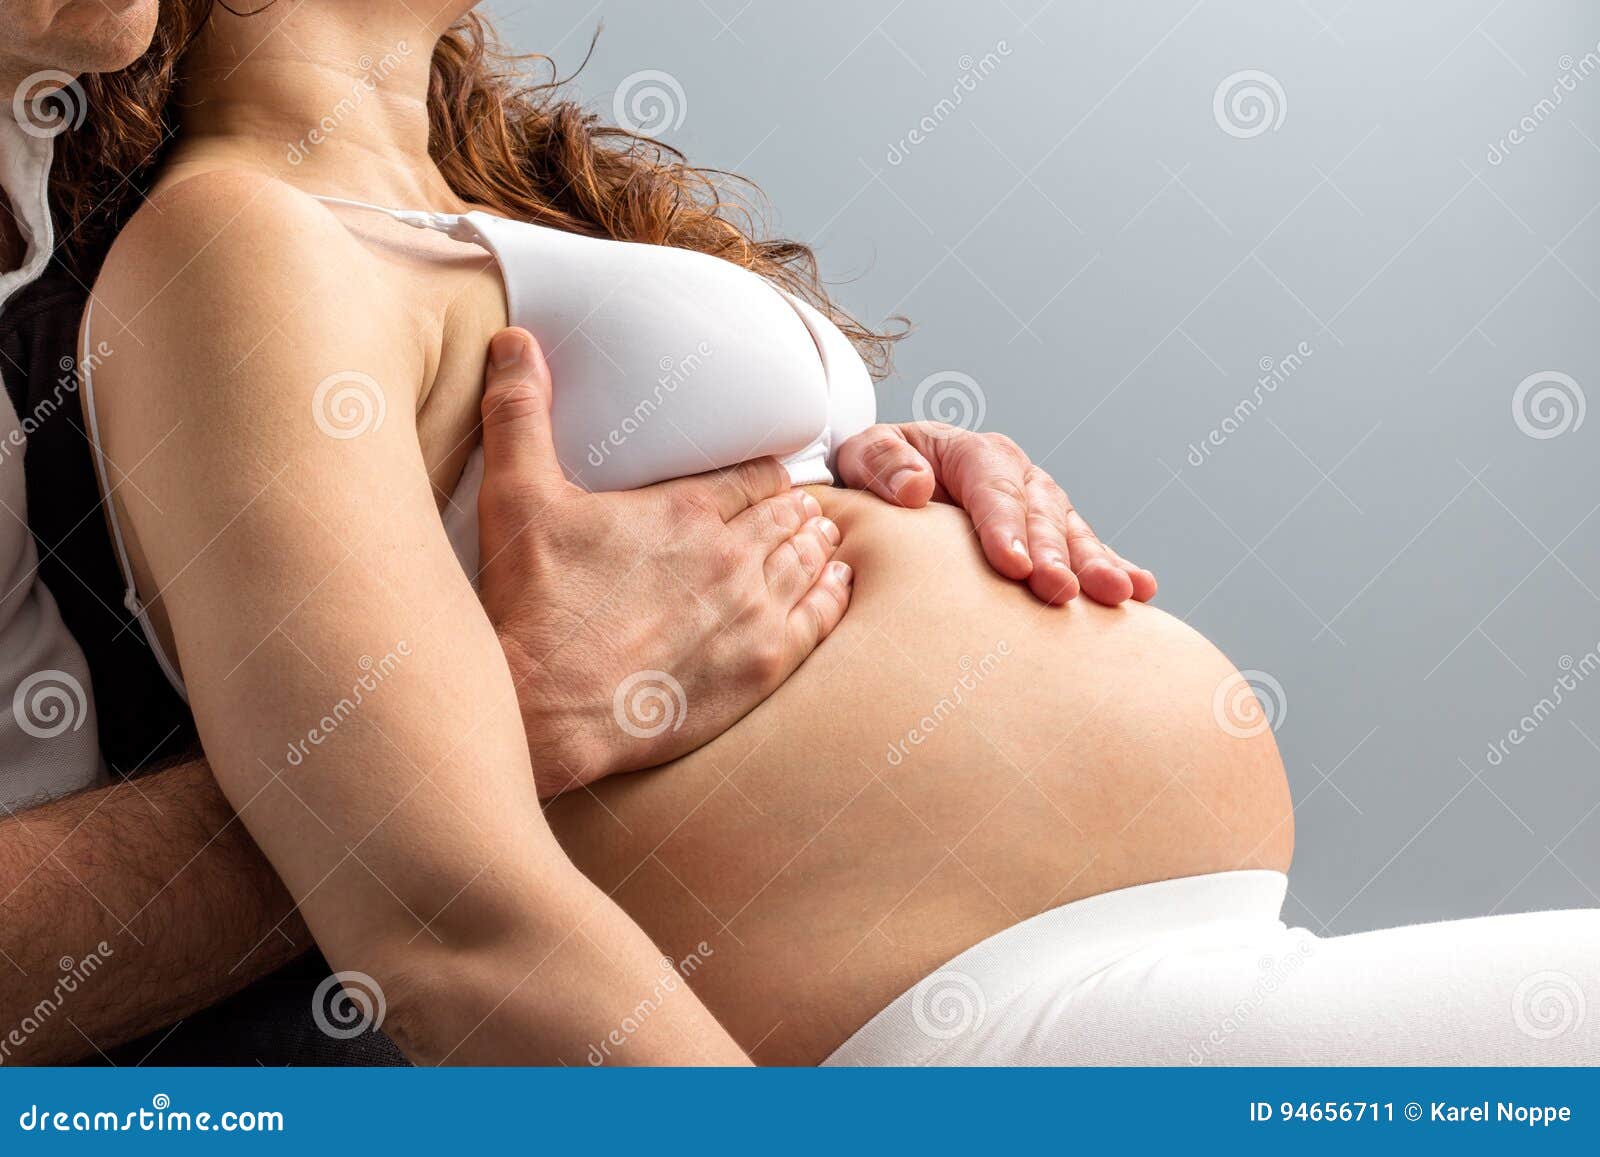 Detail of Hands Massaging Pregnant Belly